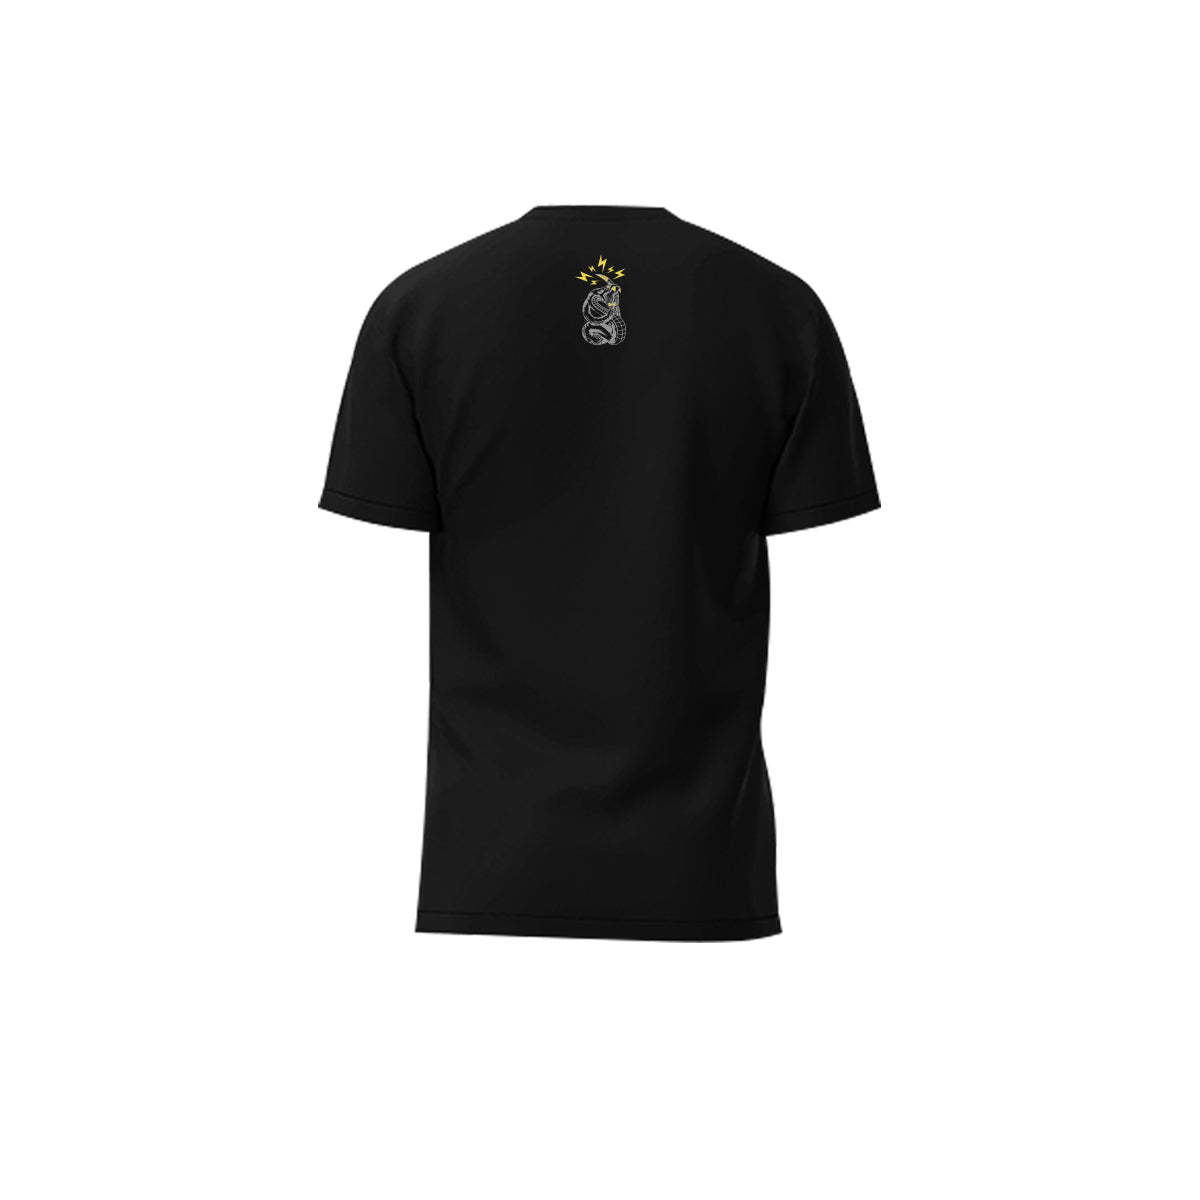 Classic 2 - Cascabel Grip and Lighting - T-Shirt